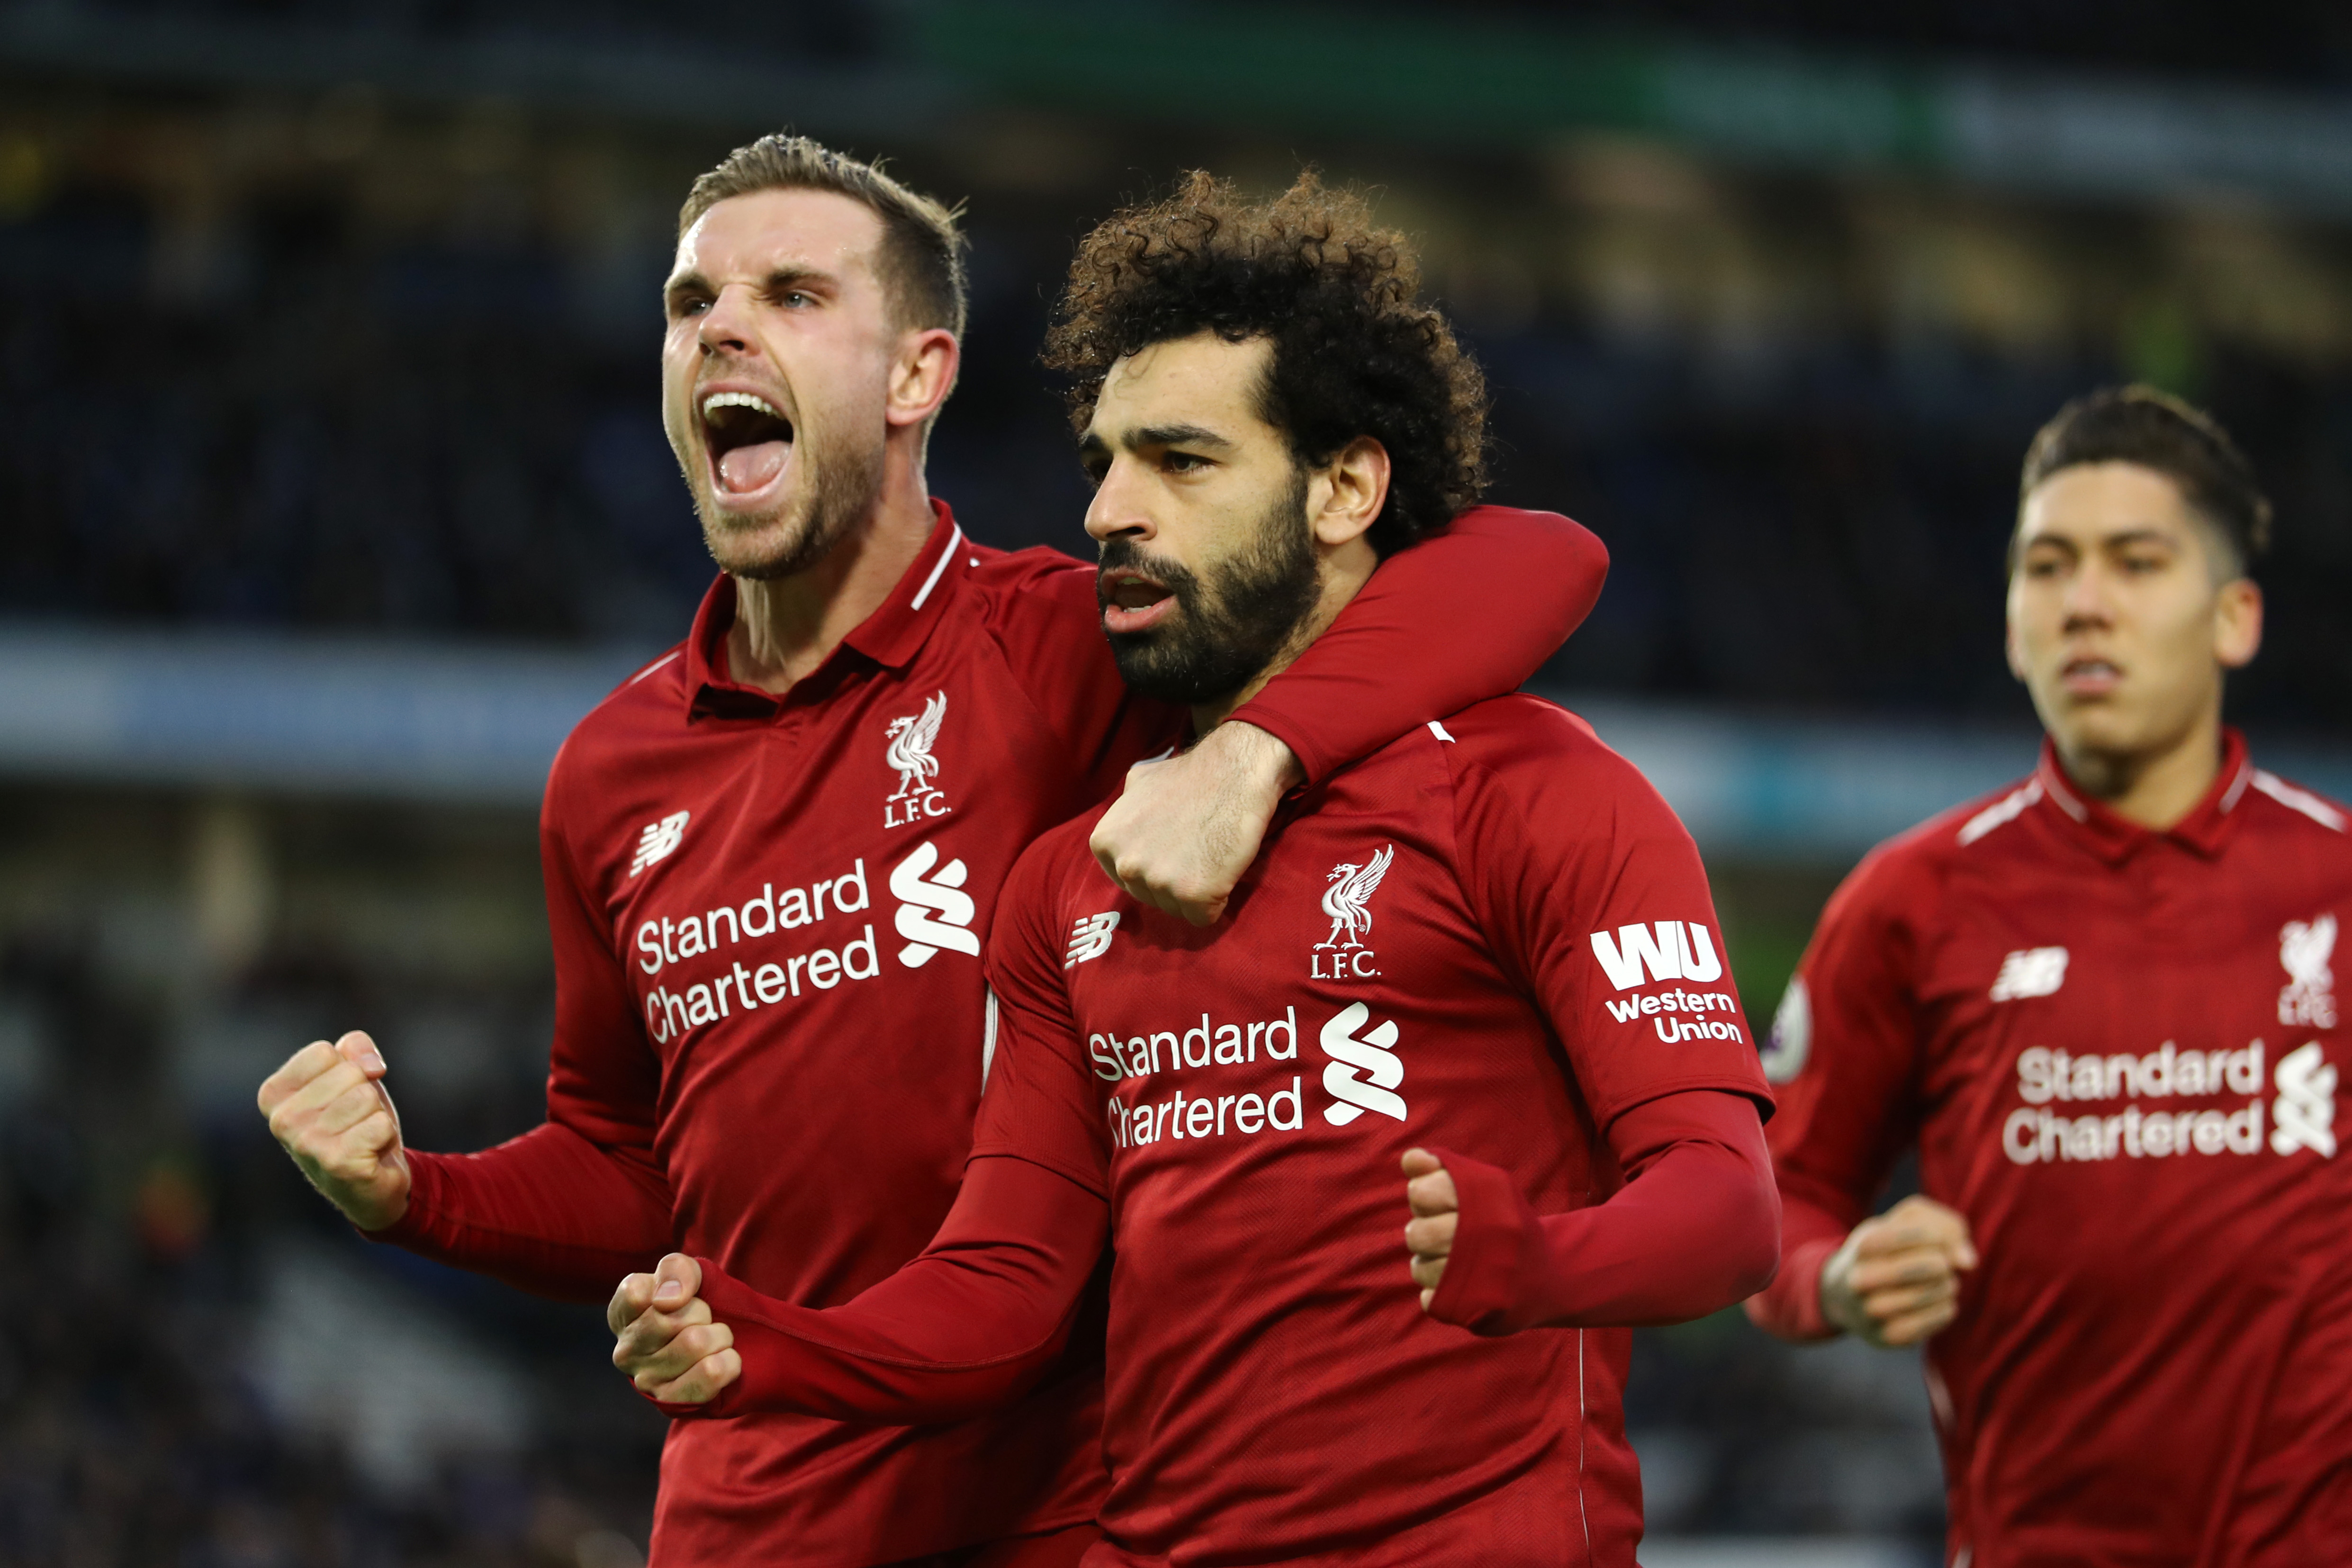 BRIGHTON, ENGLAND - JANUARY 12:  Mohamed Salah of Liverpool celebrates with team mate Jordan Henderason of Liverpool after scoring their first goal from the penalty spot during the Premier League match between Brighton & Hove Albion and Liverpool FC at American Express Community Stadium on January 12, 2019 in Brighton, United Kingdom.  (Photo by Bryn Lennon/Getty Images)